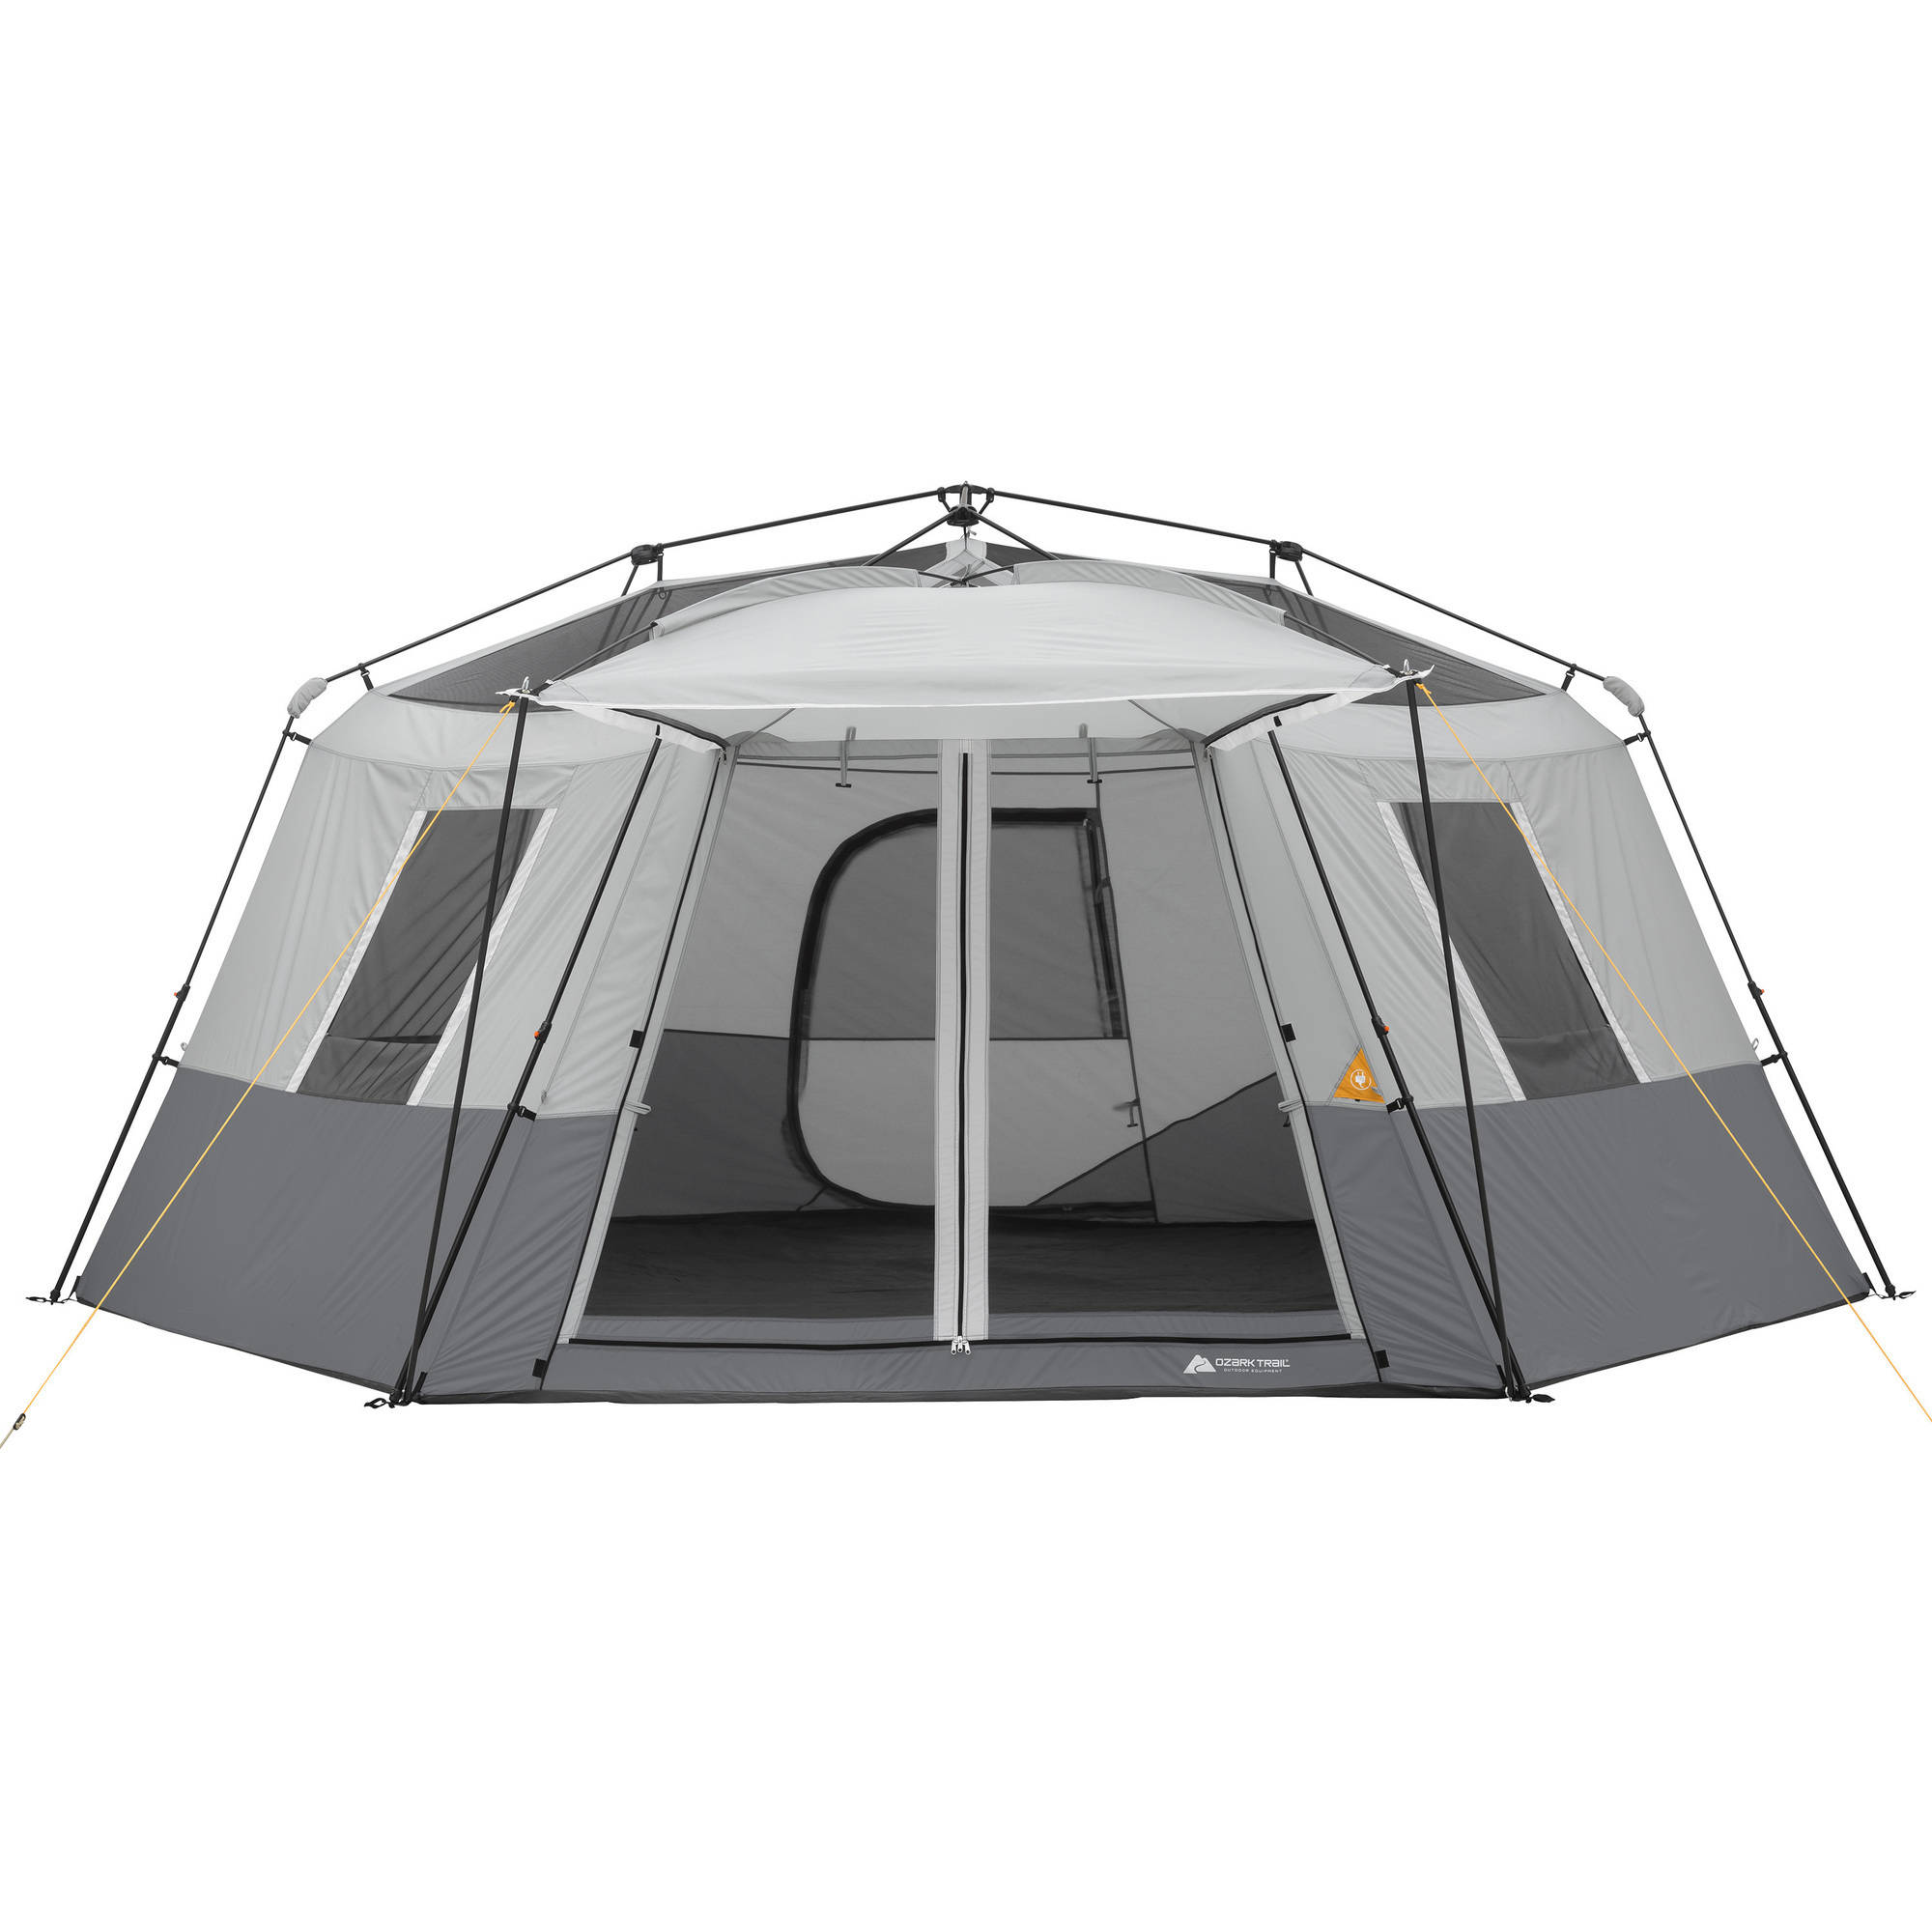 Ozark Trail 17' x 15' Person Instant Hexagon Cabin Tent, Sleeps 11 - image 2 of 15